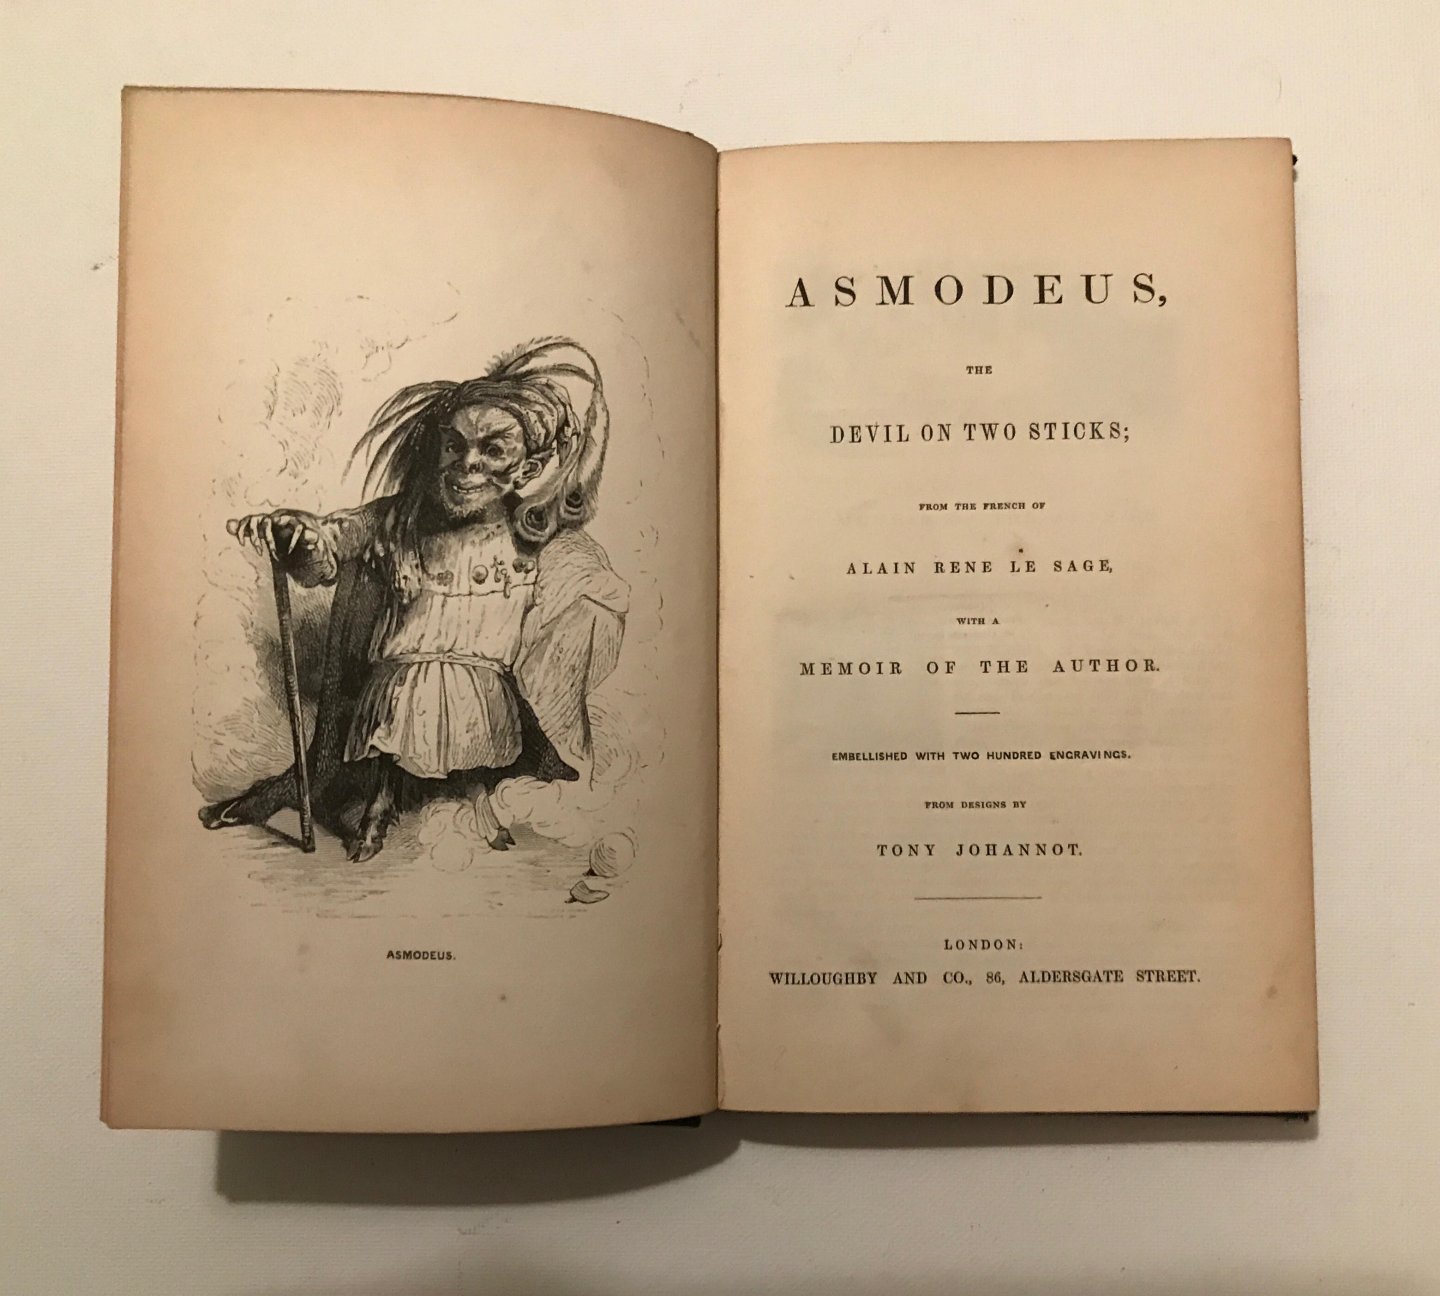 Sage, Alain Rene le - Asmodeus, The devil on two sticks. With a memoir of the author. Embellished with two hundred engravings from designs by Tony Johannot